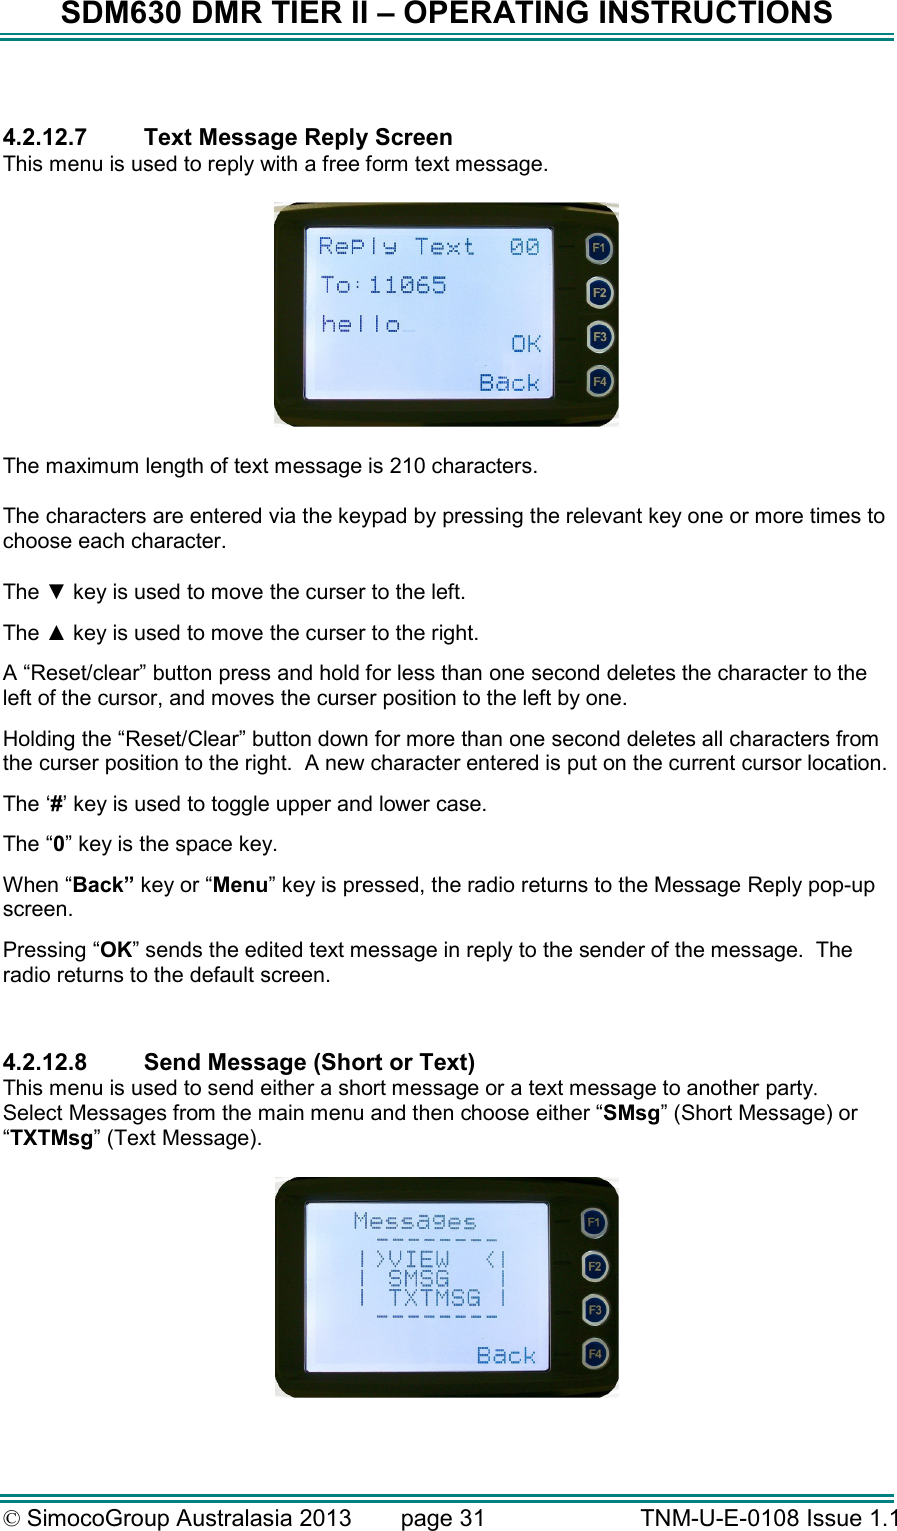 SDM630 DMR TIER II – OPERATING INSTRUCTIONS © SimocoGroup Australasia 2013   page 31   TNM-U-E-0108 Issue 1.1  4.2.12.7  Text Message Reply Screen This menu is used to reply with a free form text message.    The maximum length of text message is 210 characters.    The characters are entered via the keypad by pressing the relevant key one or more times to choose each character.  The ▼ key is used to move the curser to the left. The ▲ key is used to move the curser to the right. A “Reset/clear” button press and hold for less than one second deletes the character to the left of the cursor, and moves the curser position to the left by one.   Holding the “Reset/Clear” button down for more than one second deletes all characters from the curser position to the right.  A new character entered is put on the current cursor location.   The ‘#’ key is used to toggle upper and lower case. The “0” key is the space key. When “Back” key or “Menu” key is pressed, the radio returns to the Message Reply pop-up screen. Pressing “OK” sends the edited text message in reply to the sender of the message.  The radio returns to the default screen.  4.2.12.8  Send Message (Short or Text) This menu is used to send either a short message or a text message to another party.    Select Messages from the main menu and then choose either “SMsg” (Short Message) or “TXTMsg” (Text Message).    